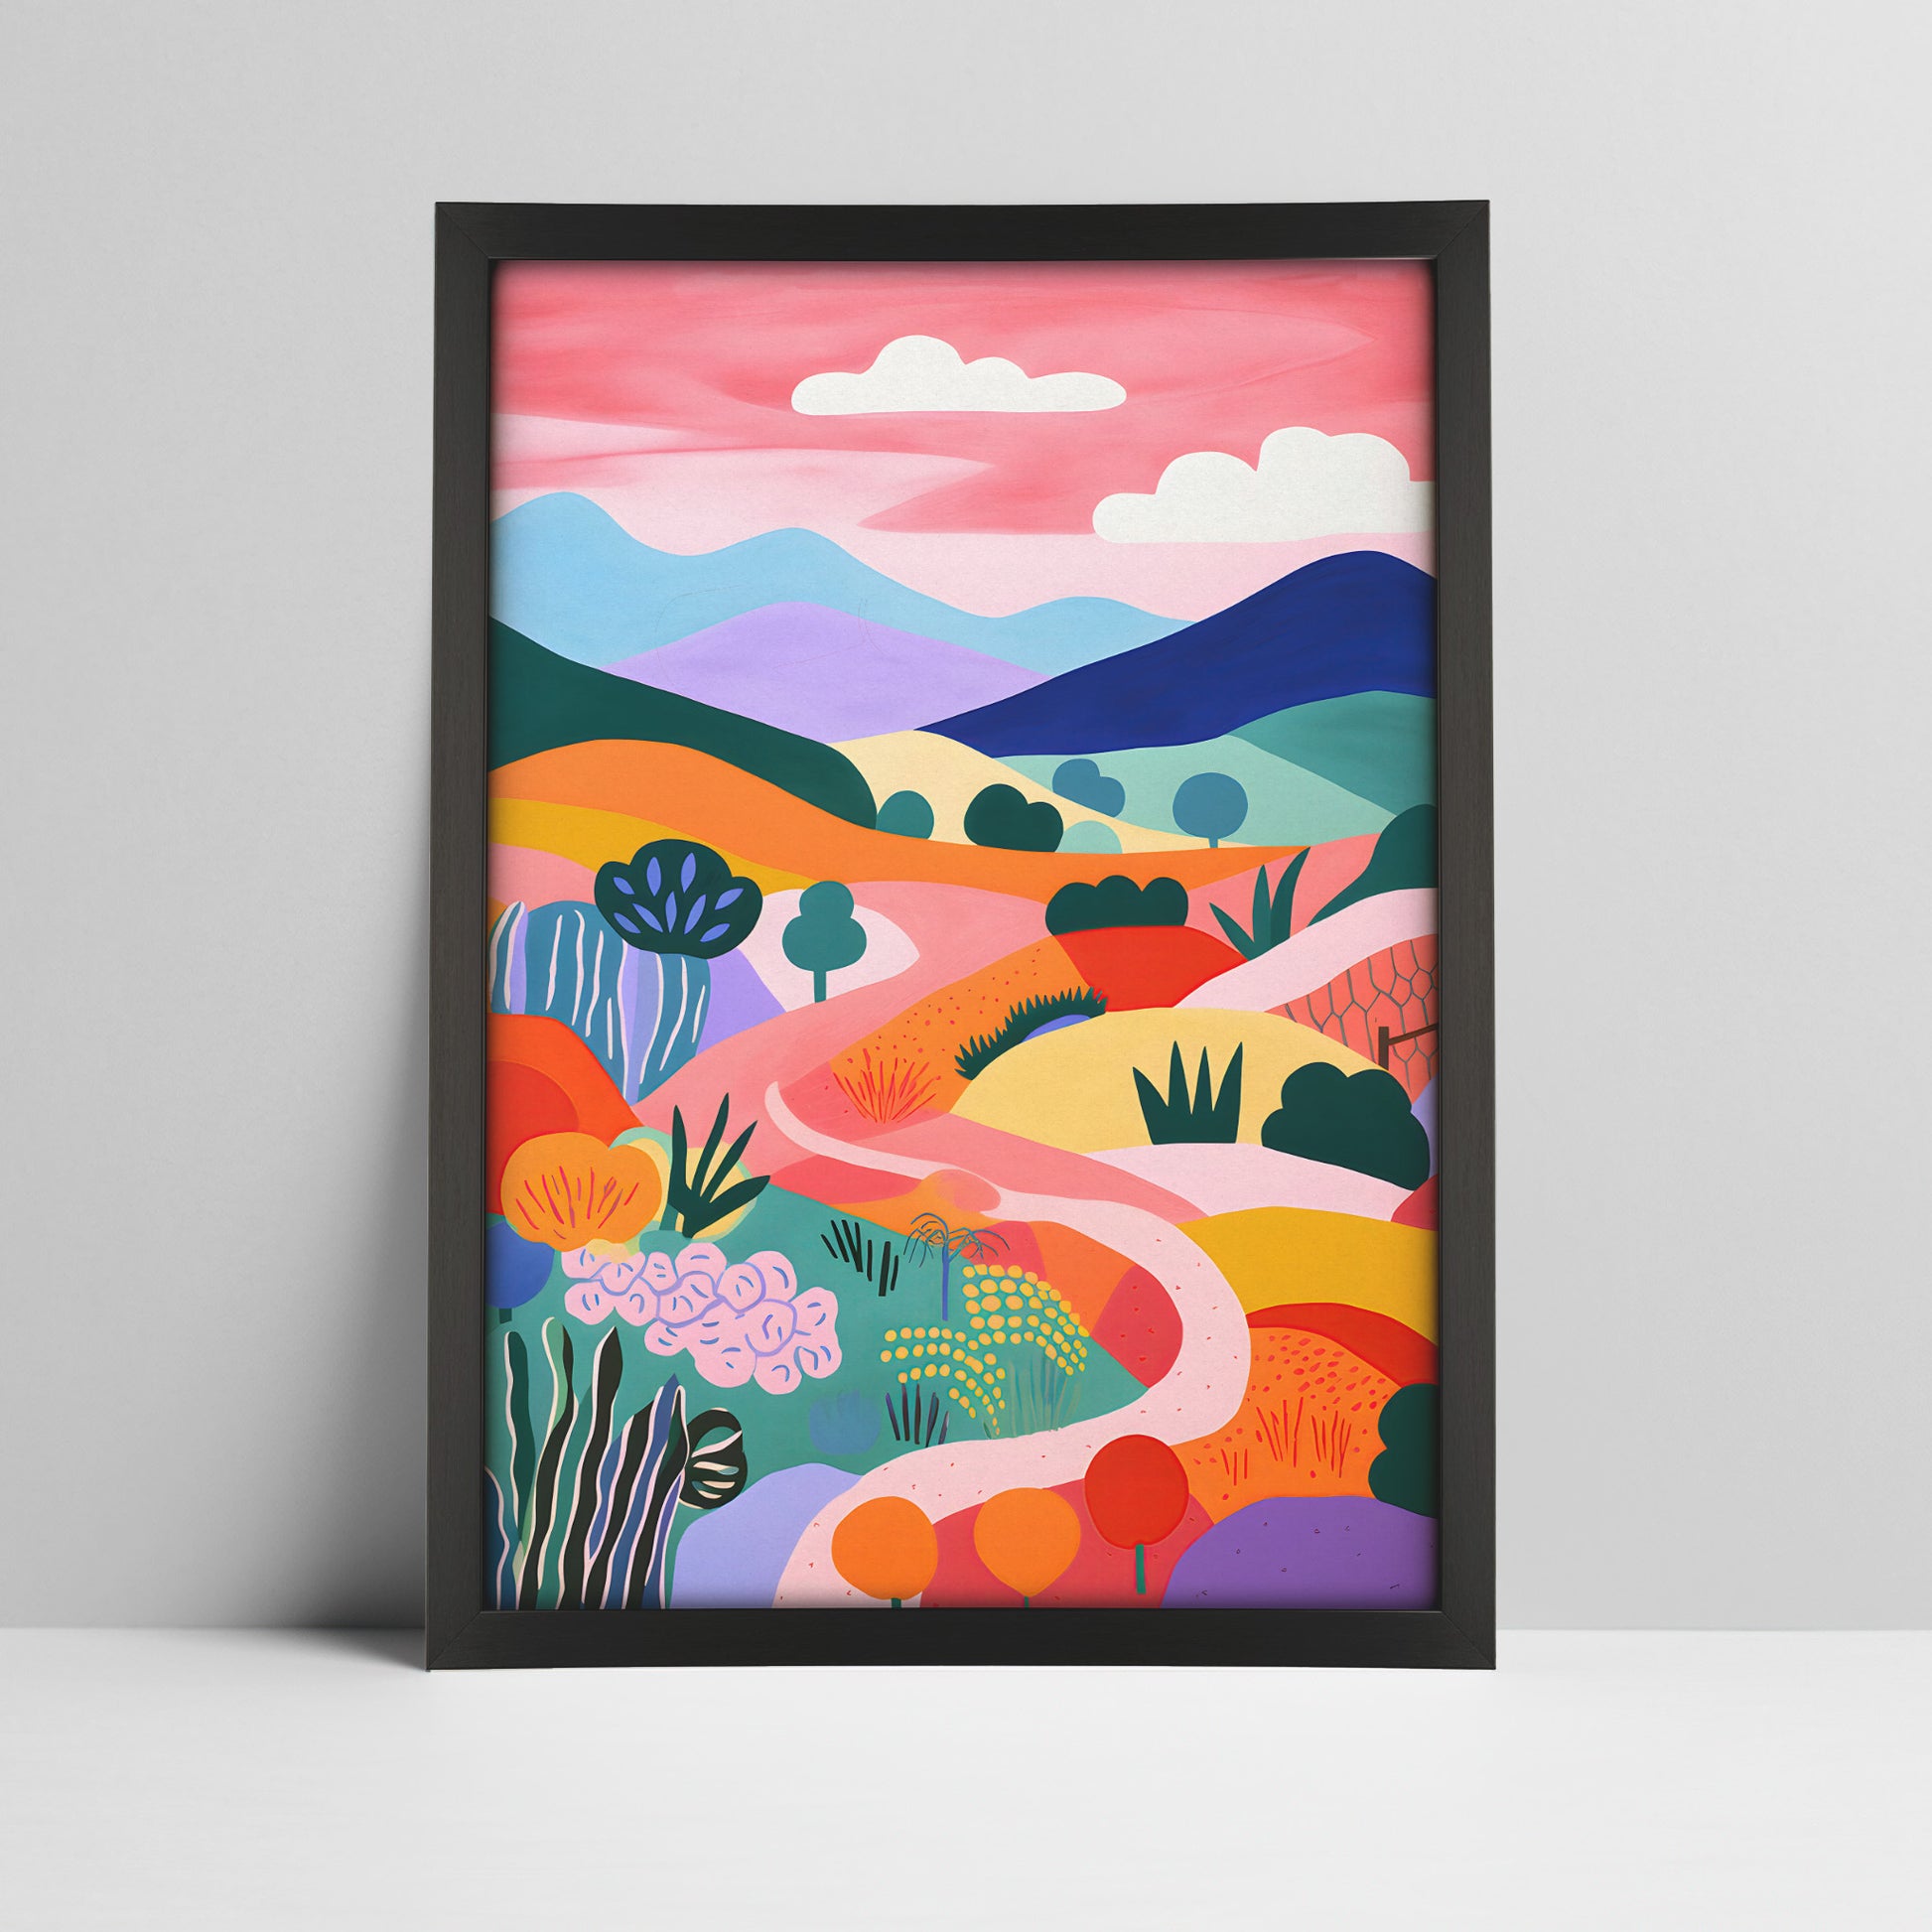 Abstract landscape with colorful hills and sky in a black frame